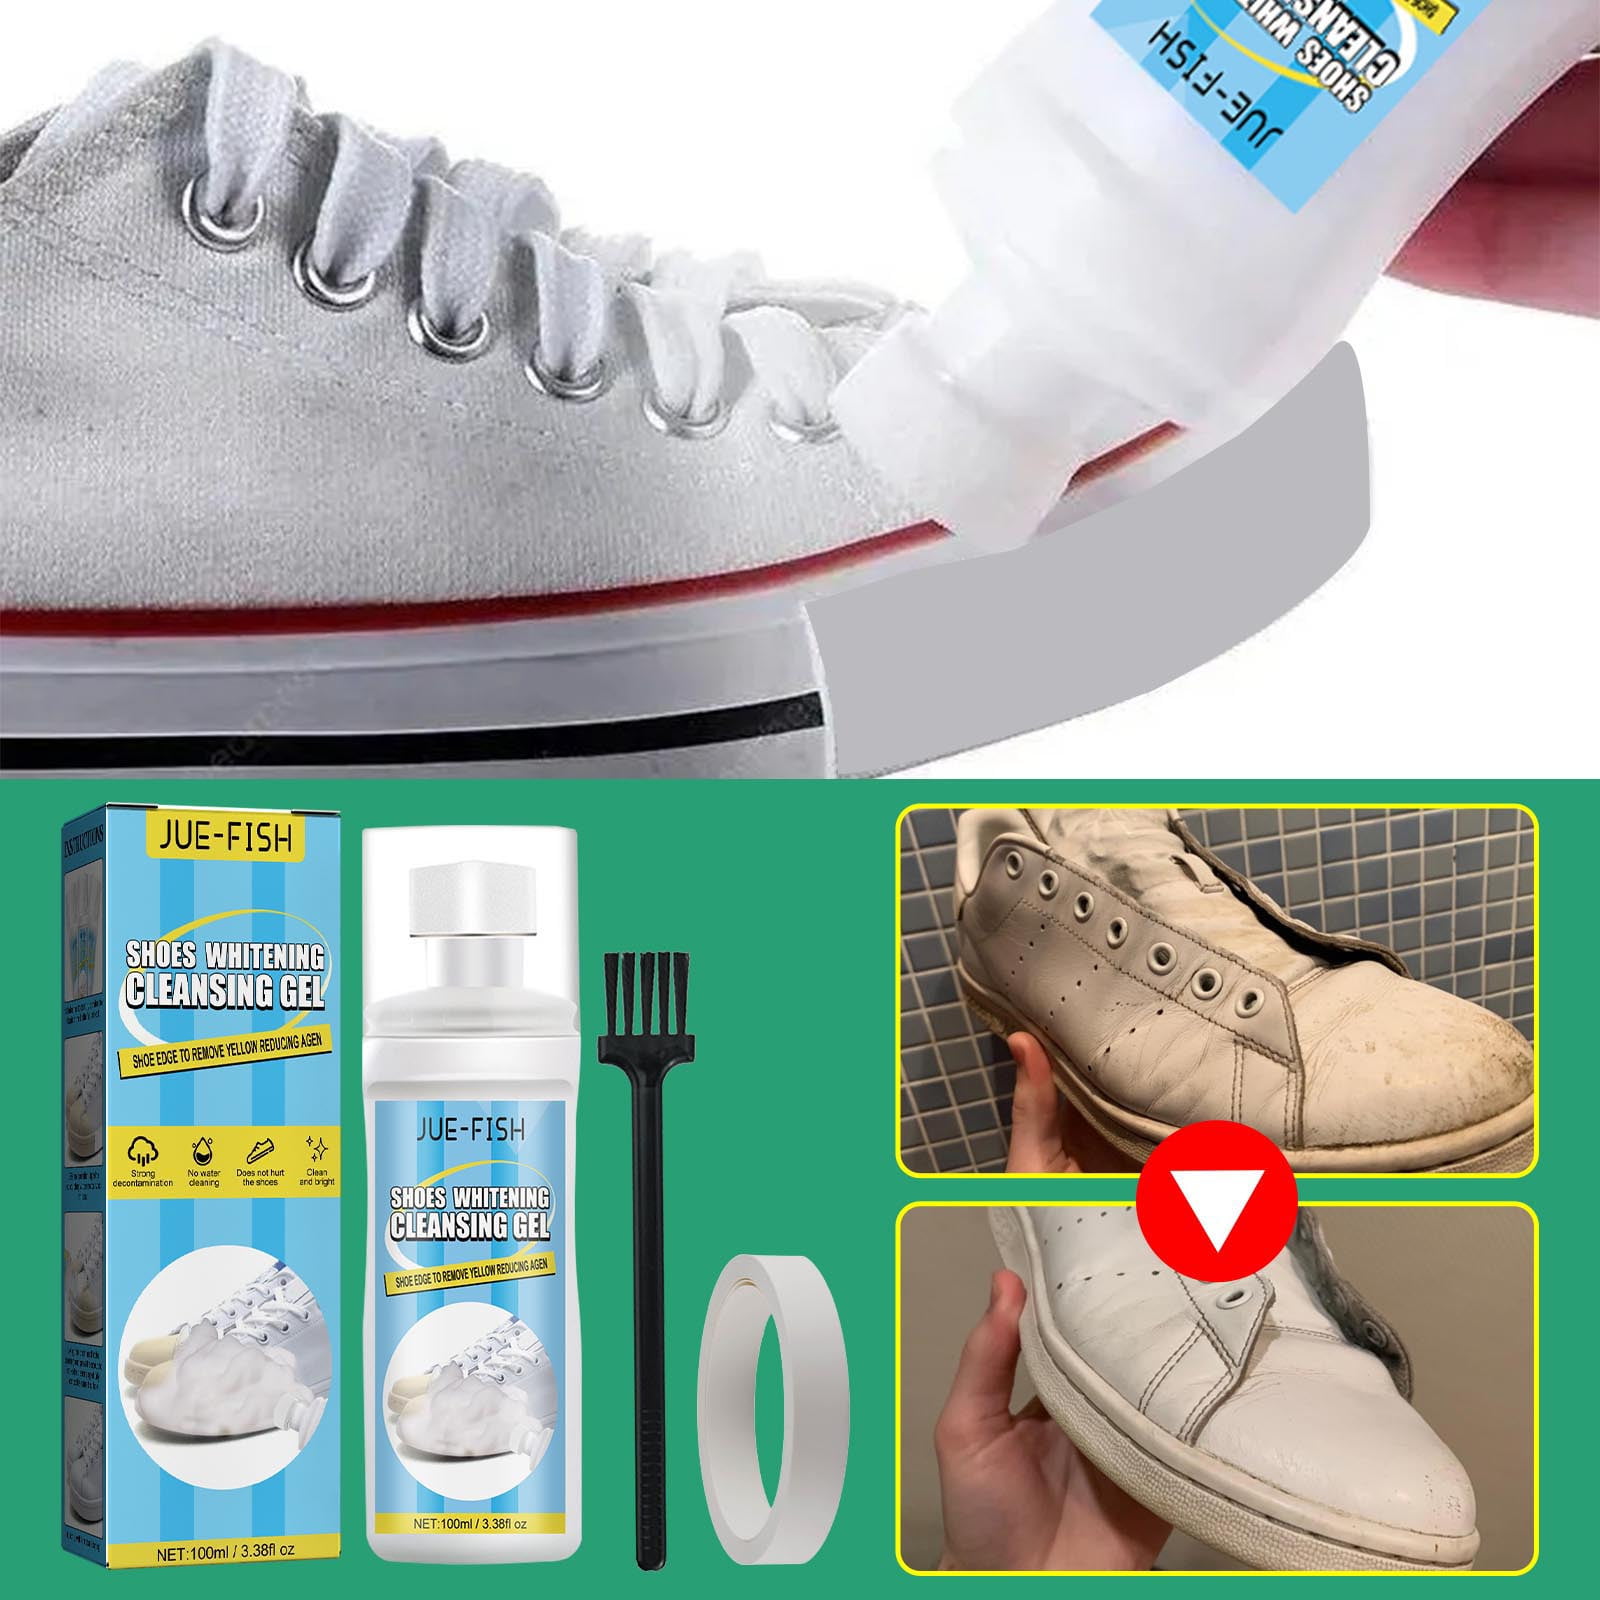 Tzchesanchi White Shoe Cleaning Cream Not Hurt Hands and Shoe Care Suitable for Car Interiors Sneakers, Adult Unisex